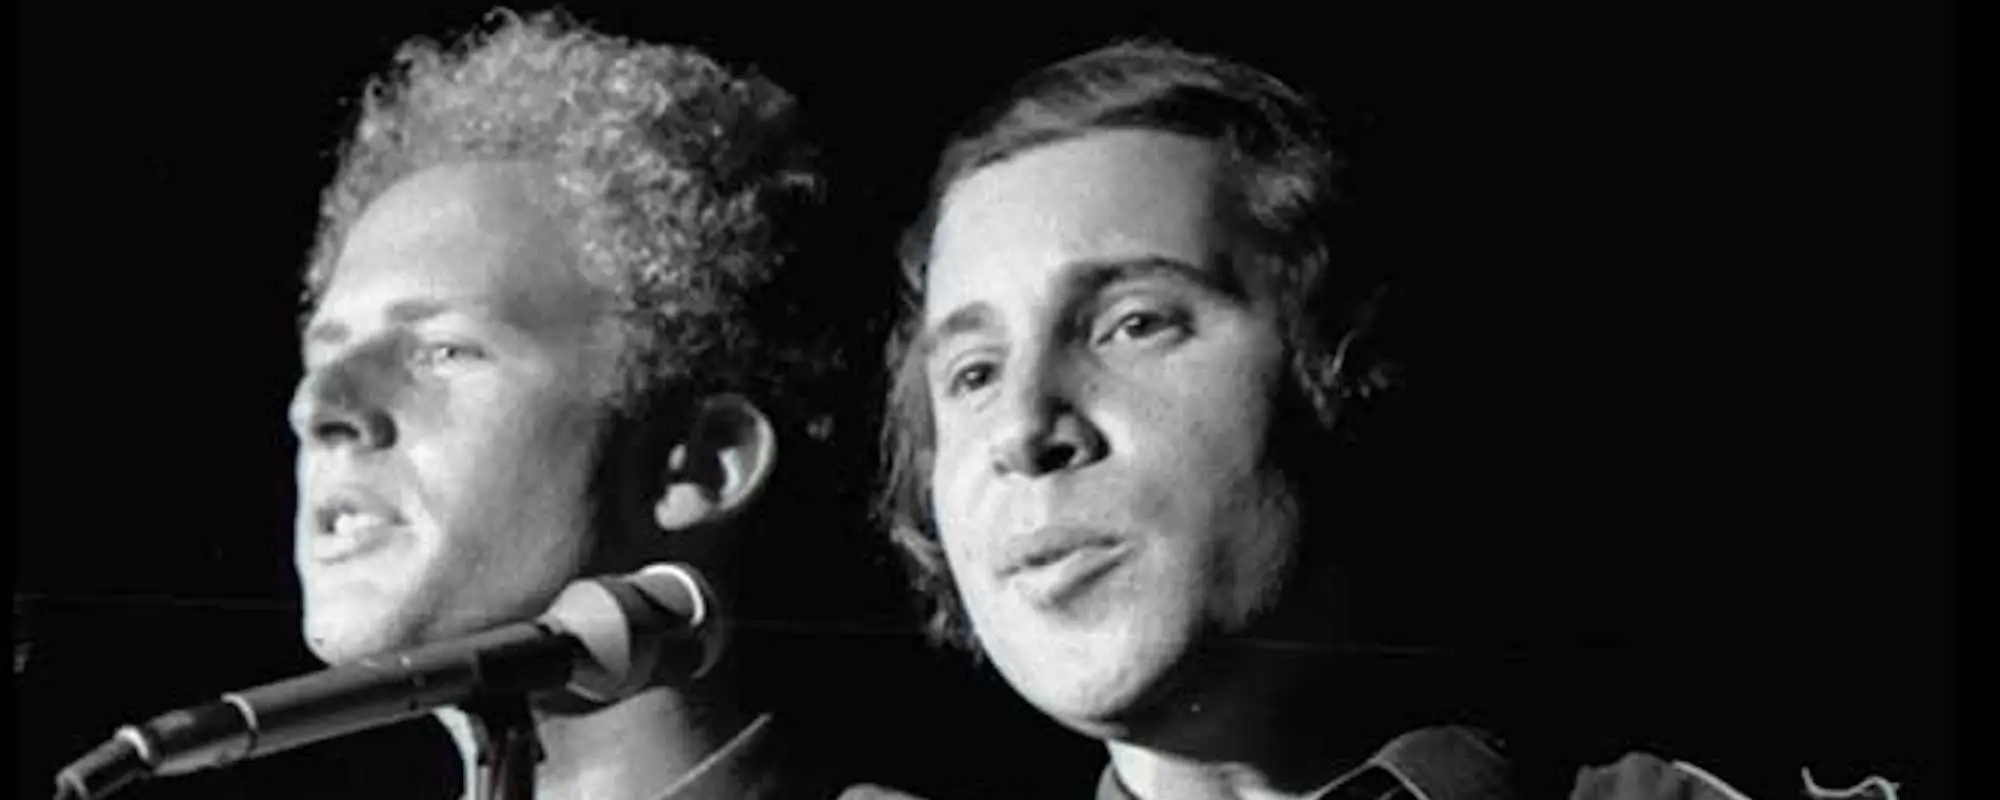 Behind the Meaning of “Mrs. Robinson” by Simon & Garfunkel